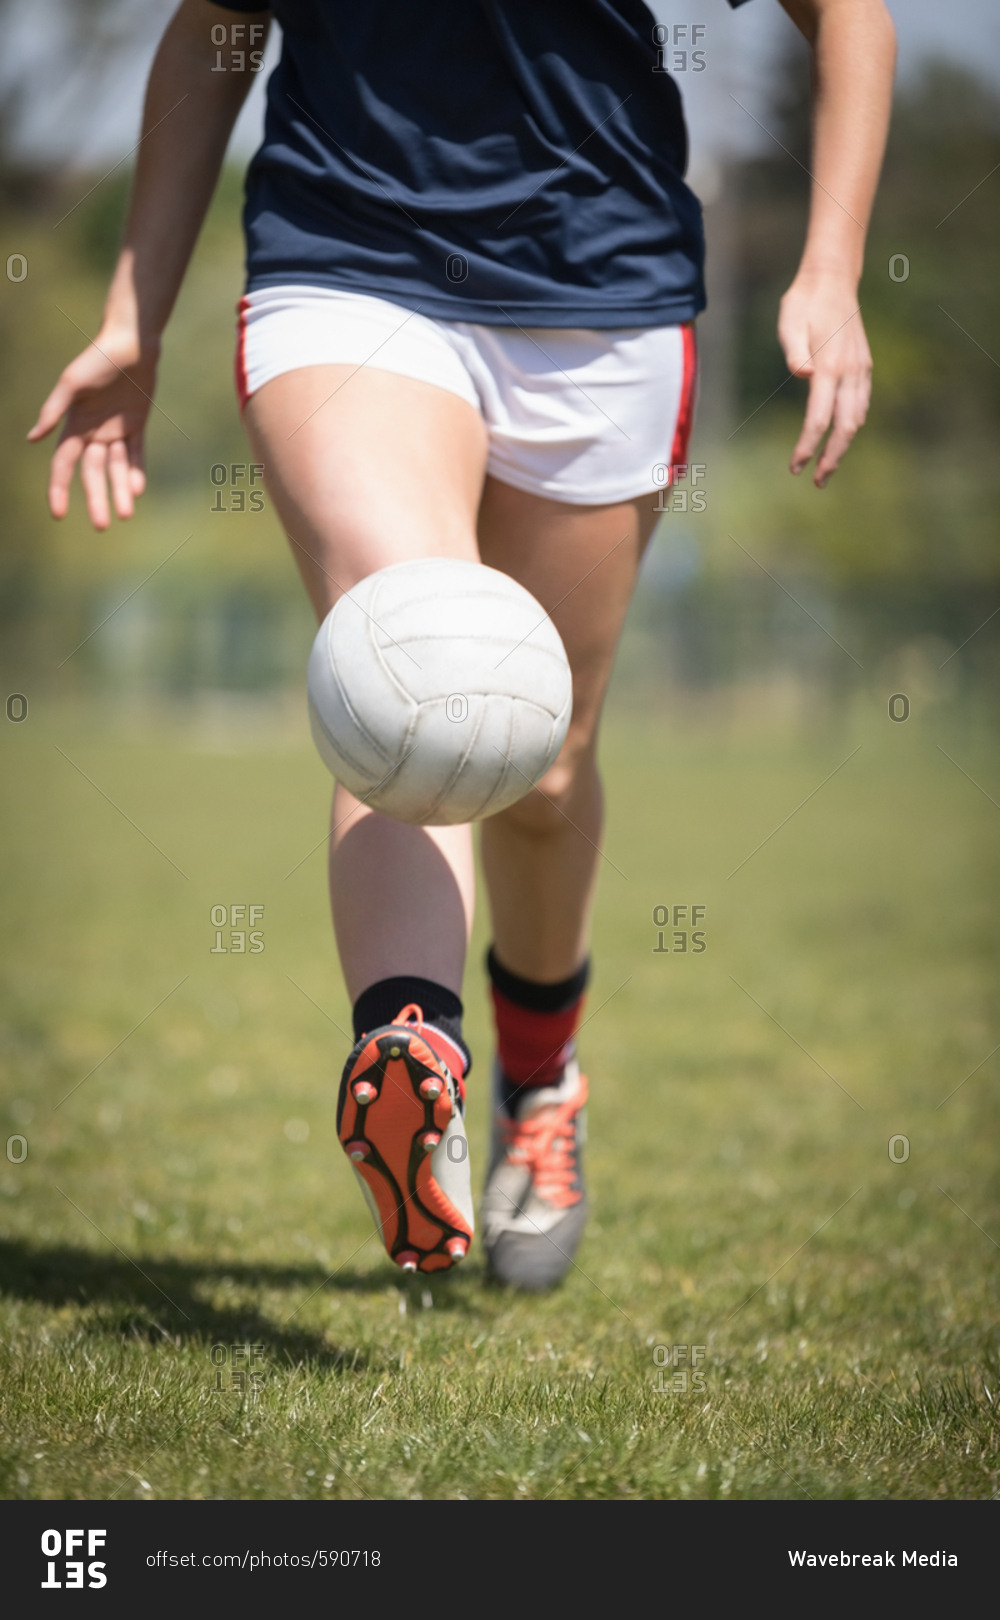 Low section of female player playing with soccer ball on field